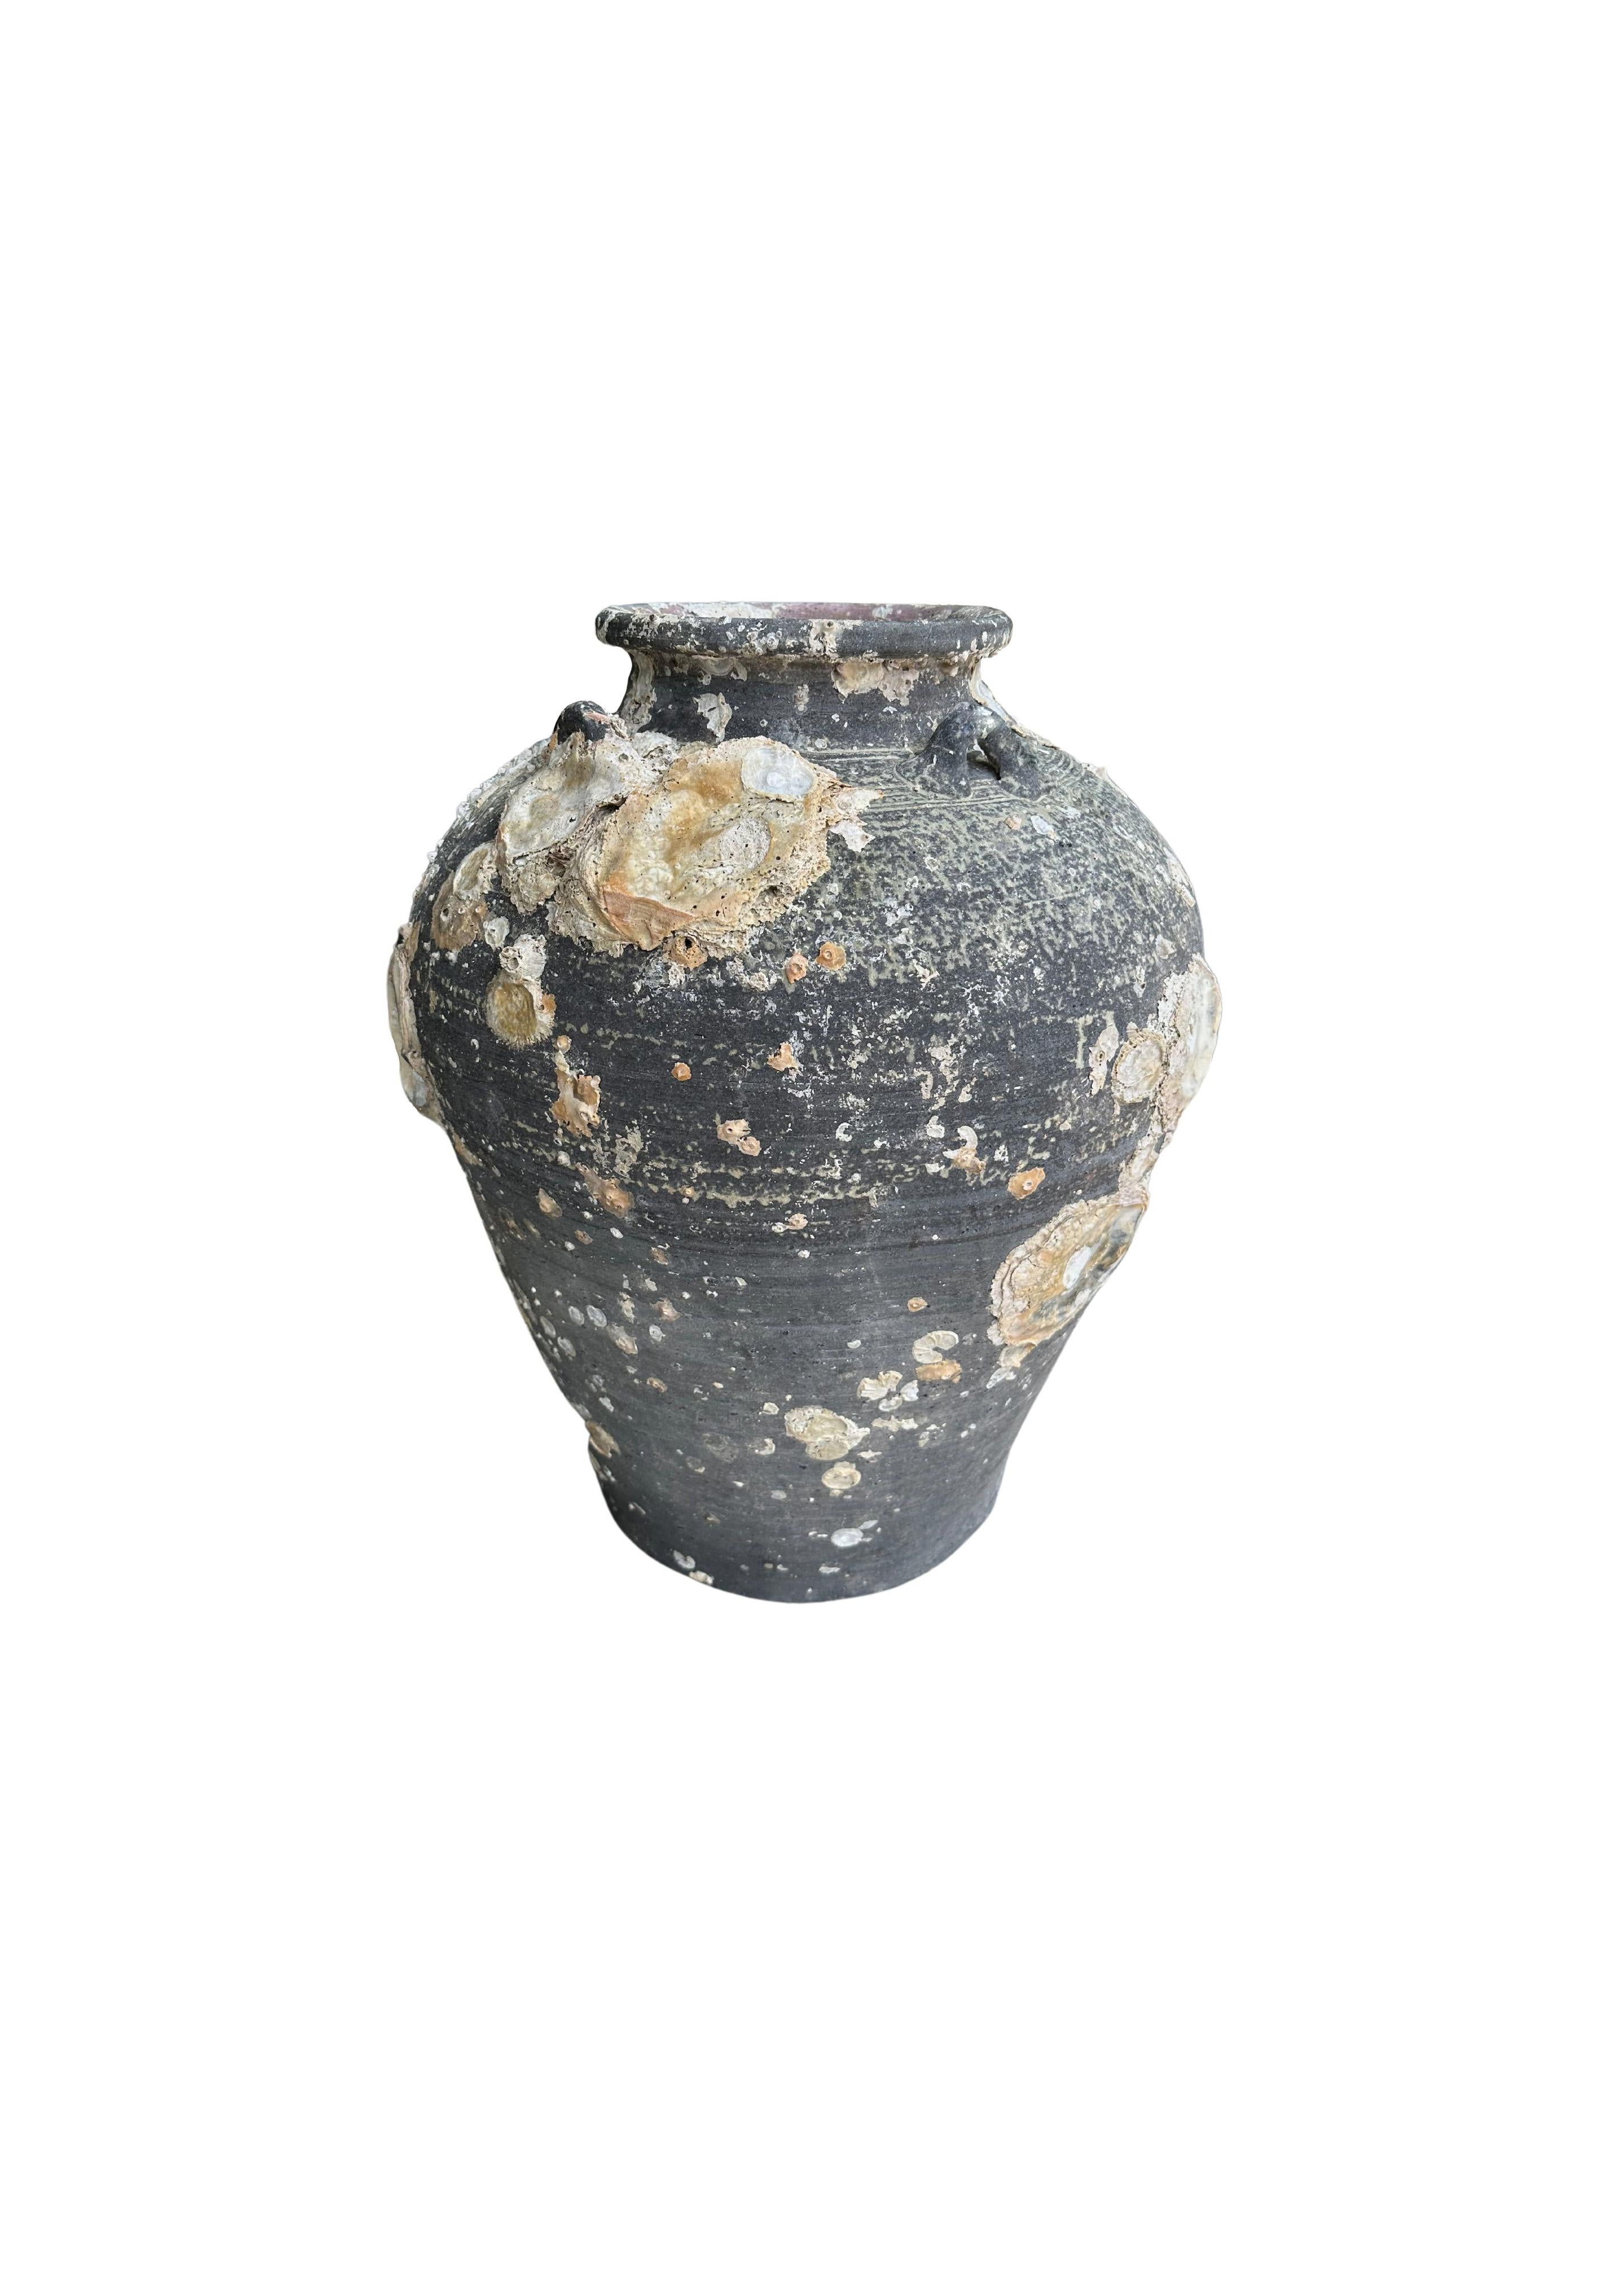 A wonderful example of a 16th Century Sawankhalok jar from a Shipwreck off the Coast of the Indonesian Island of Batam. Batam was one of the most substantial and influential ports in the South China Sea where an abundance of trade was conducted.